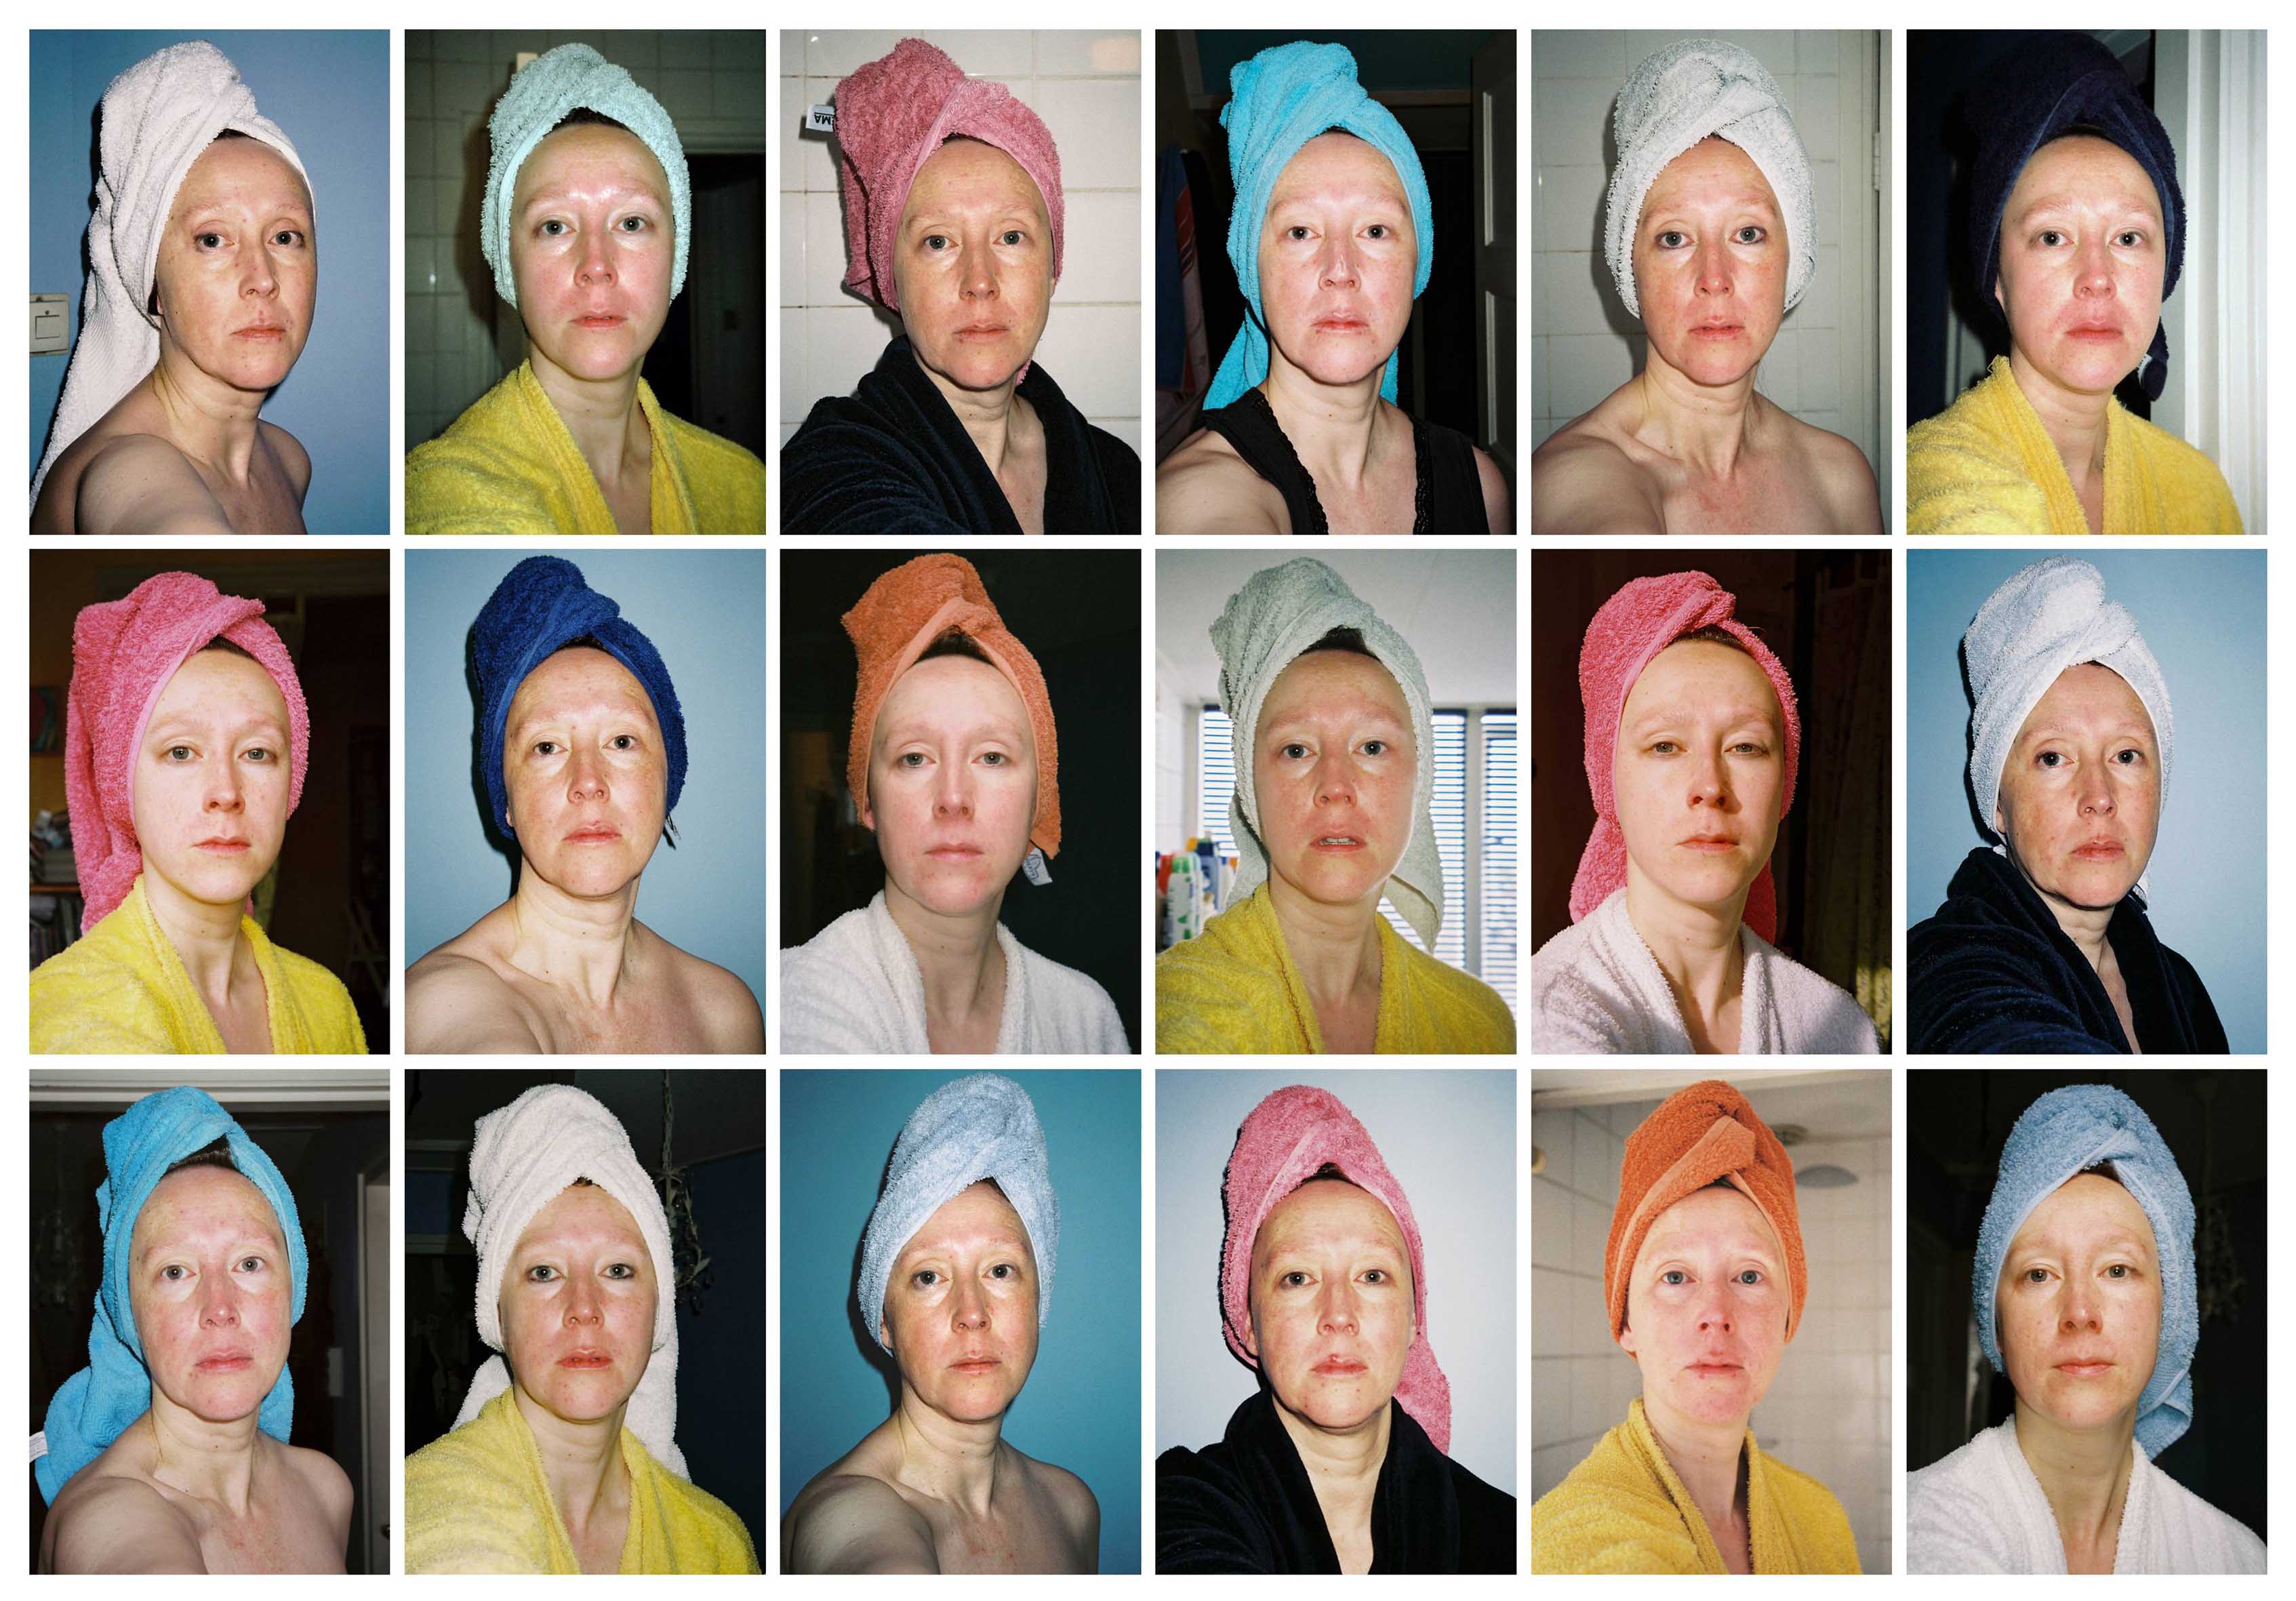 Lique Schoot, 18 Days with Hair Towels (2008 - 2019)